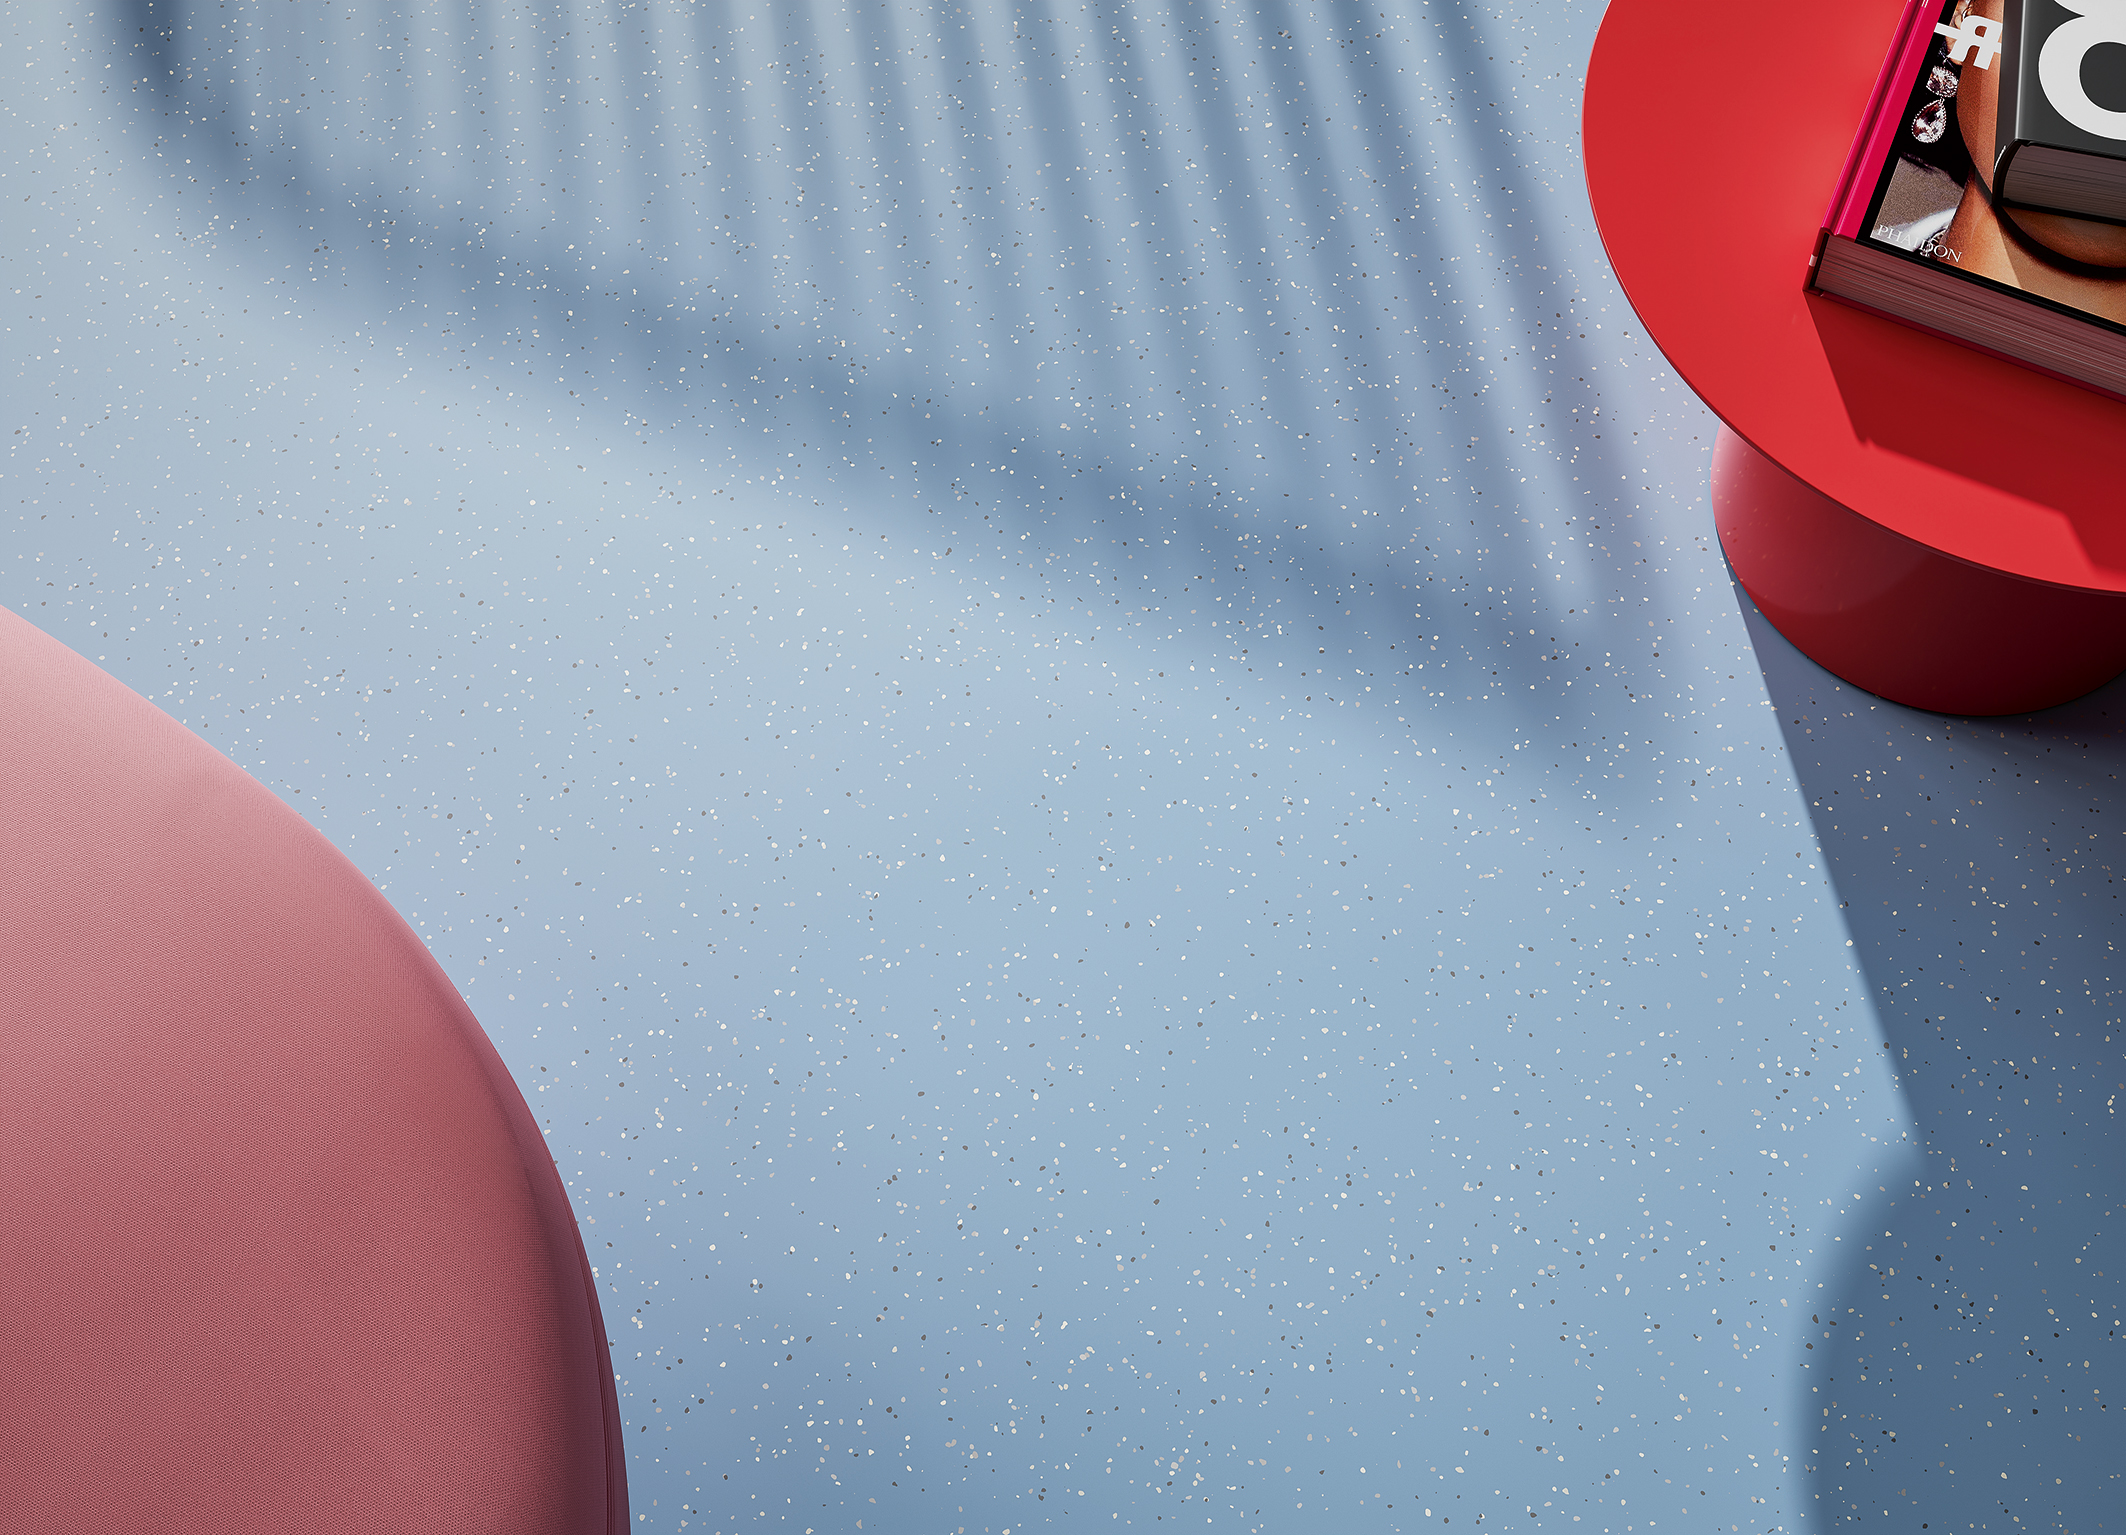 Detail photo: noraplan convia floor covering in blue with a red table